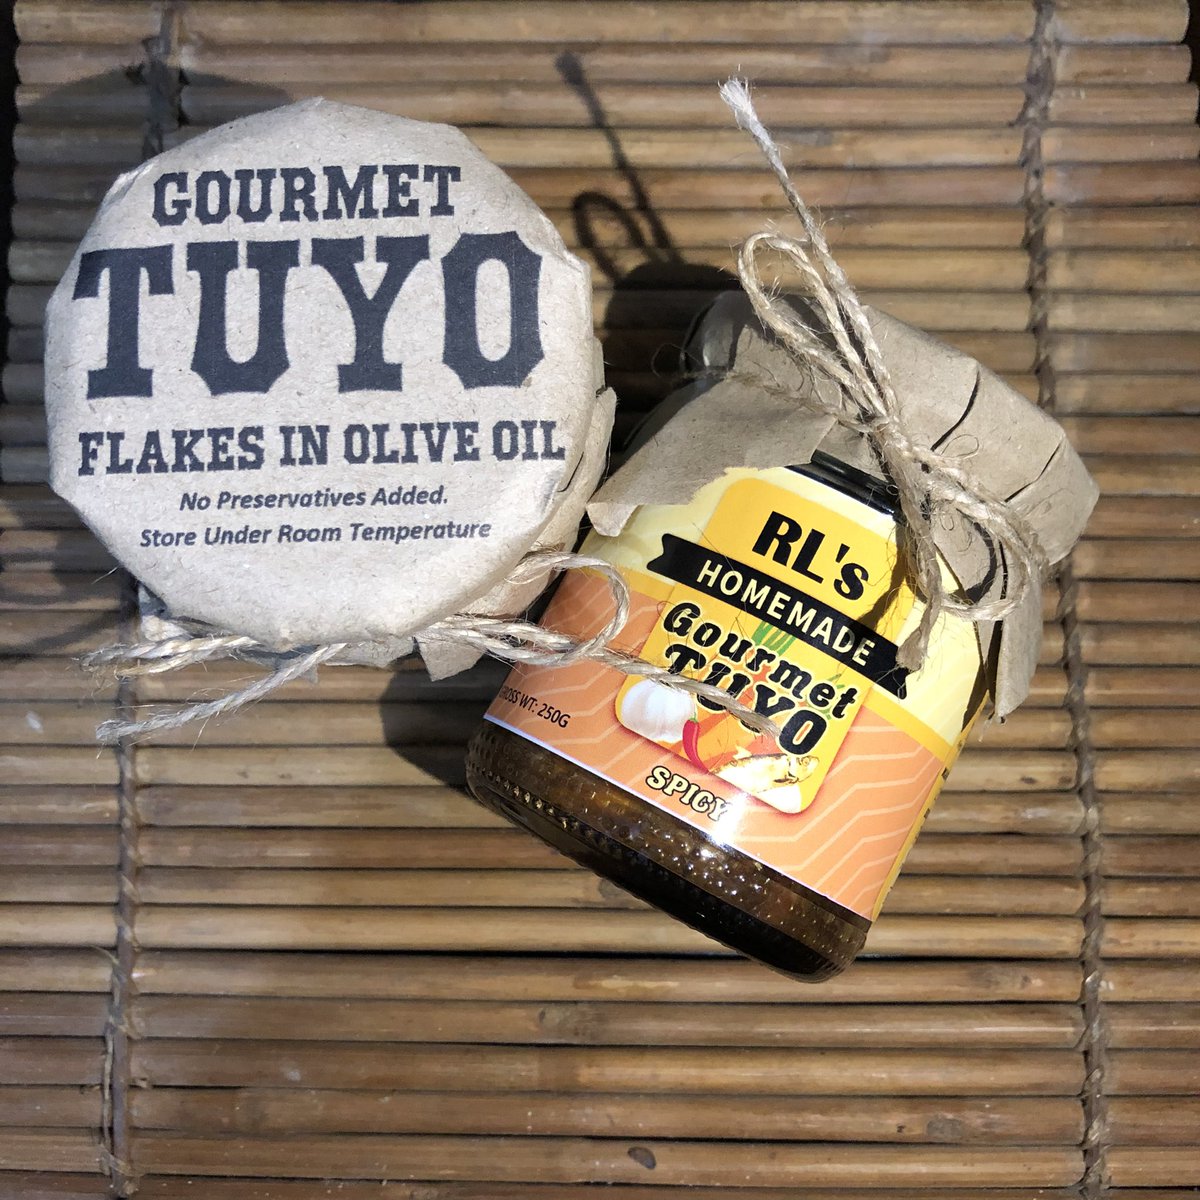 ‼️GOURMET TUYO FLAKES ‼️
IN OLIVE OIL FOR SALE!!! 🐟🐟🐟

• available in spicy 🌶 & original (250g)
• no preservatives added
• 100% homemade 

PM for price and orders ♥️😊
Follow us on Ig: @rls_homemadegourmet
Like us on facebook: facebook.com/rlshomemadegou… ♥️